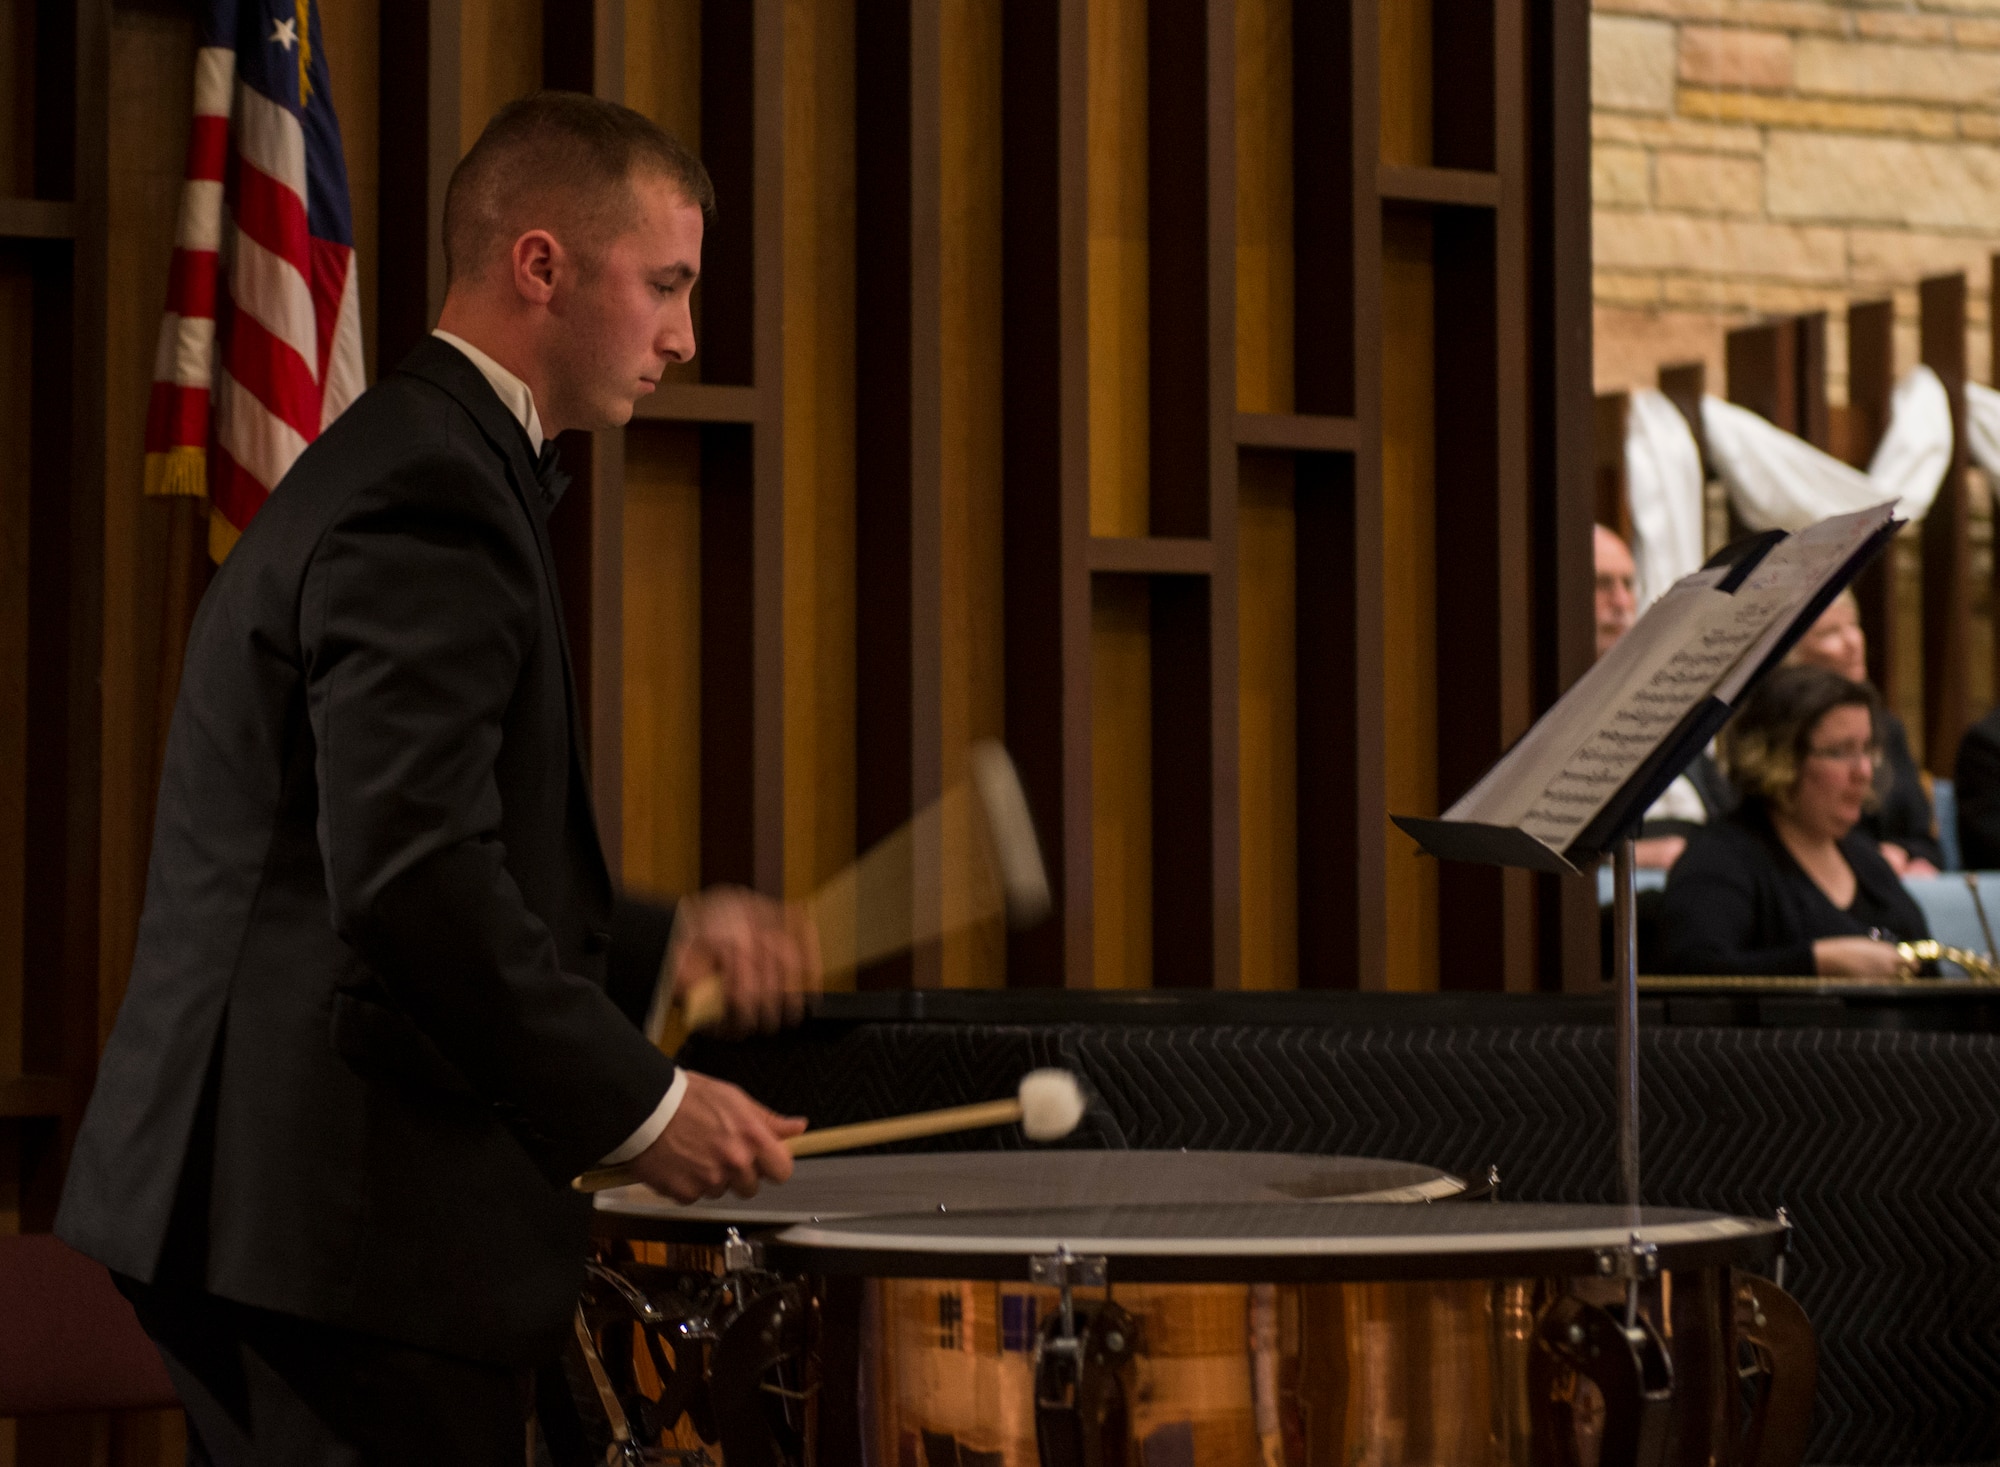 Staff Sgt. Richard Ransom, 375th Civil Engineering Squadron construction management technician, plays a drum during a Belleville Philharmonic Orchestra performance April 28, 2018, at the Saint Paul United Church of Christ in Belleville, Illinois. Ransom has been a member of the Belleville Philharmonic Orchestra for the last three years and is one of two 375th Air Mobility Wing members playing for the orchestra. (U.S. Air Force Photo by Airman 1st Class Chad Gorecki)